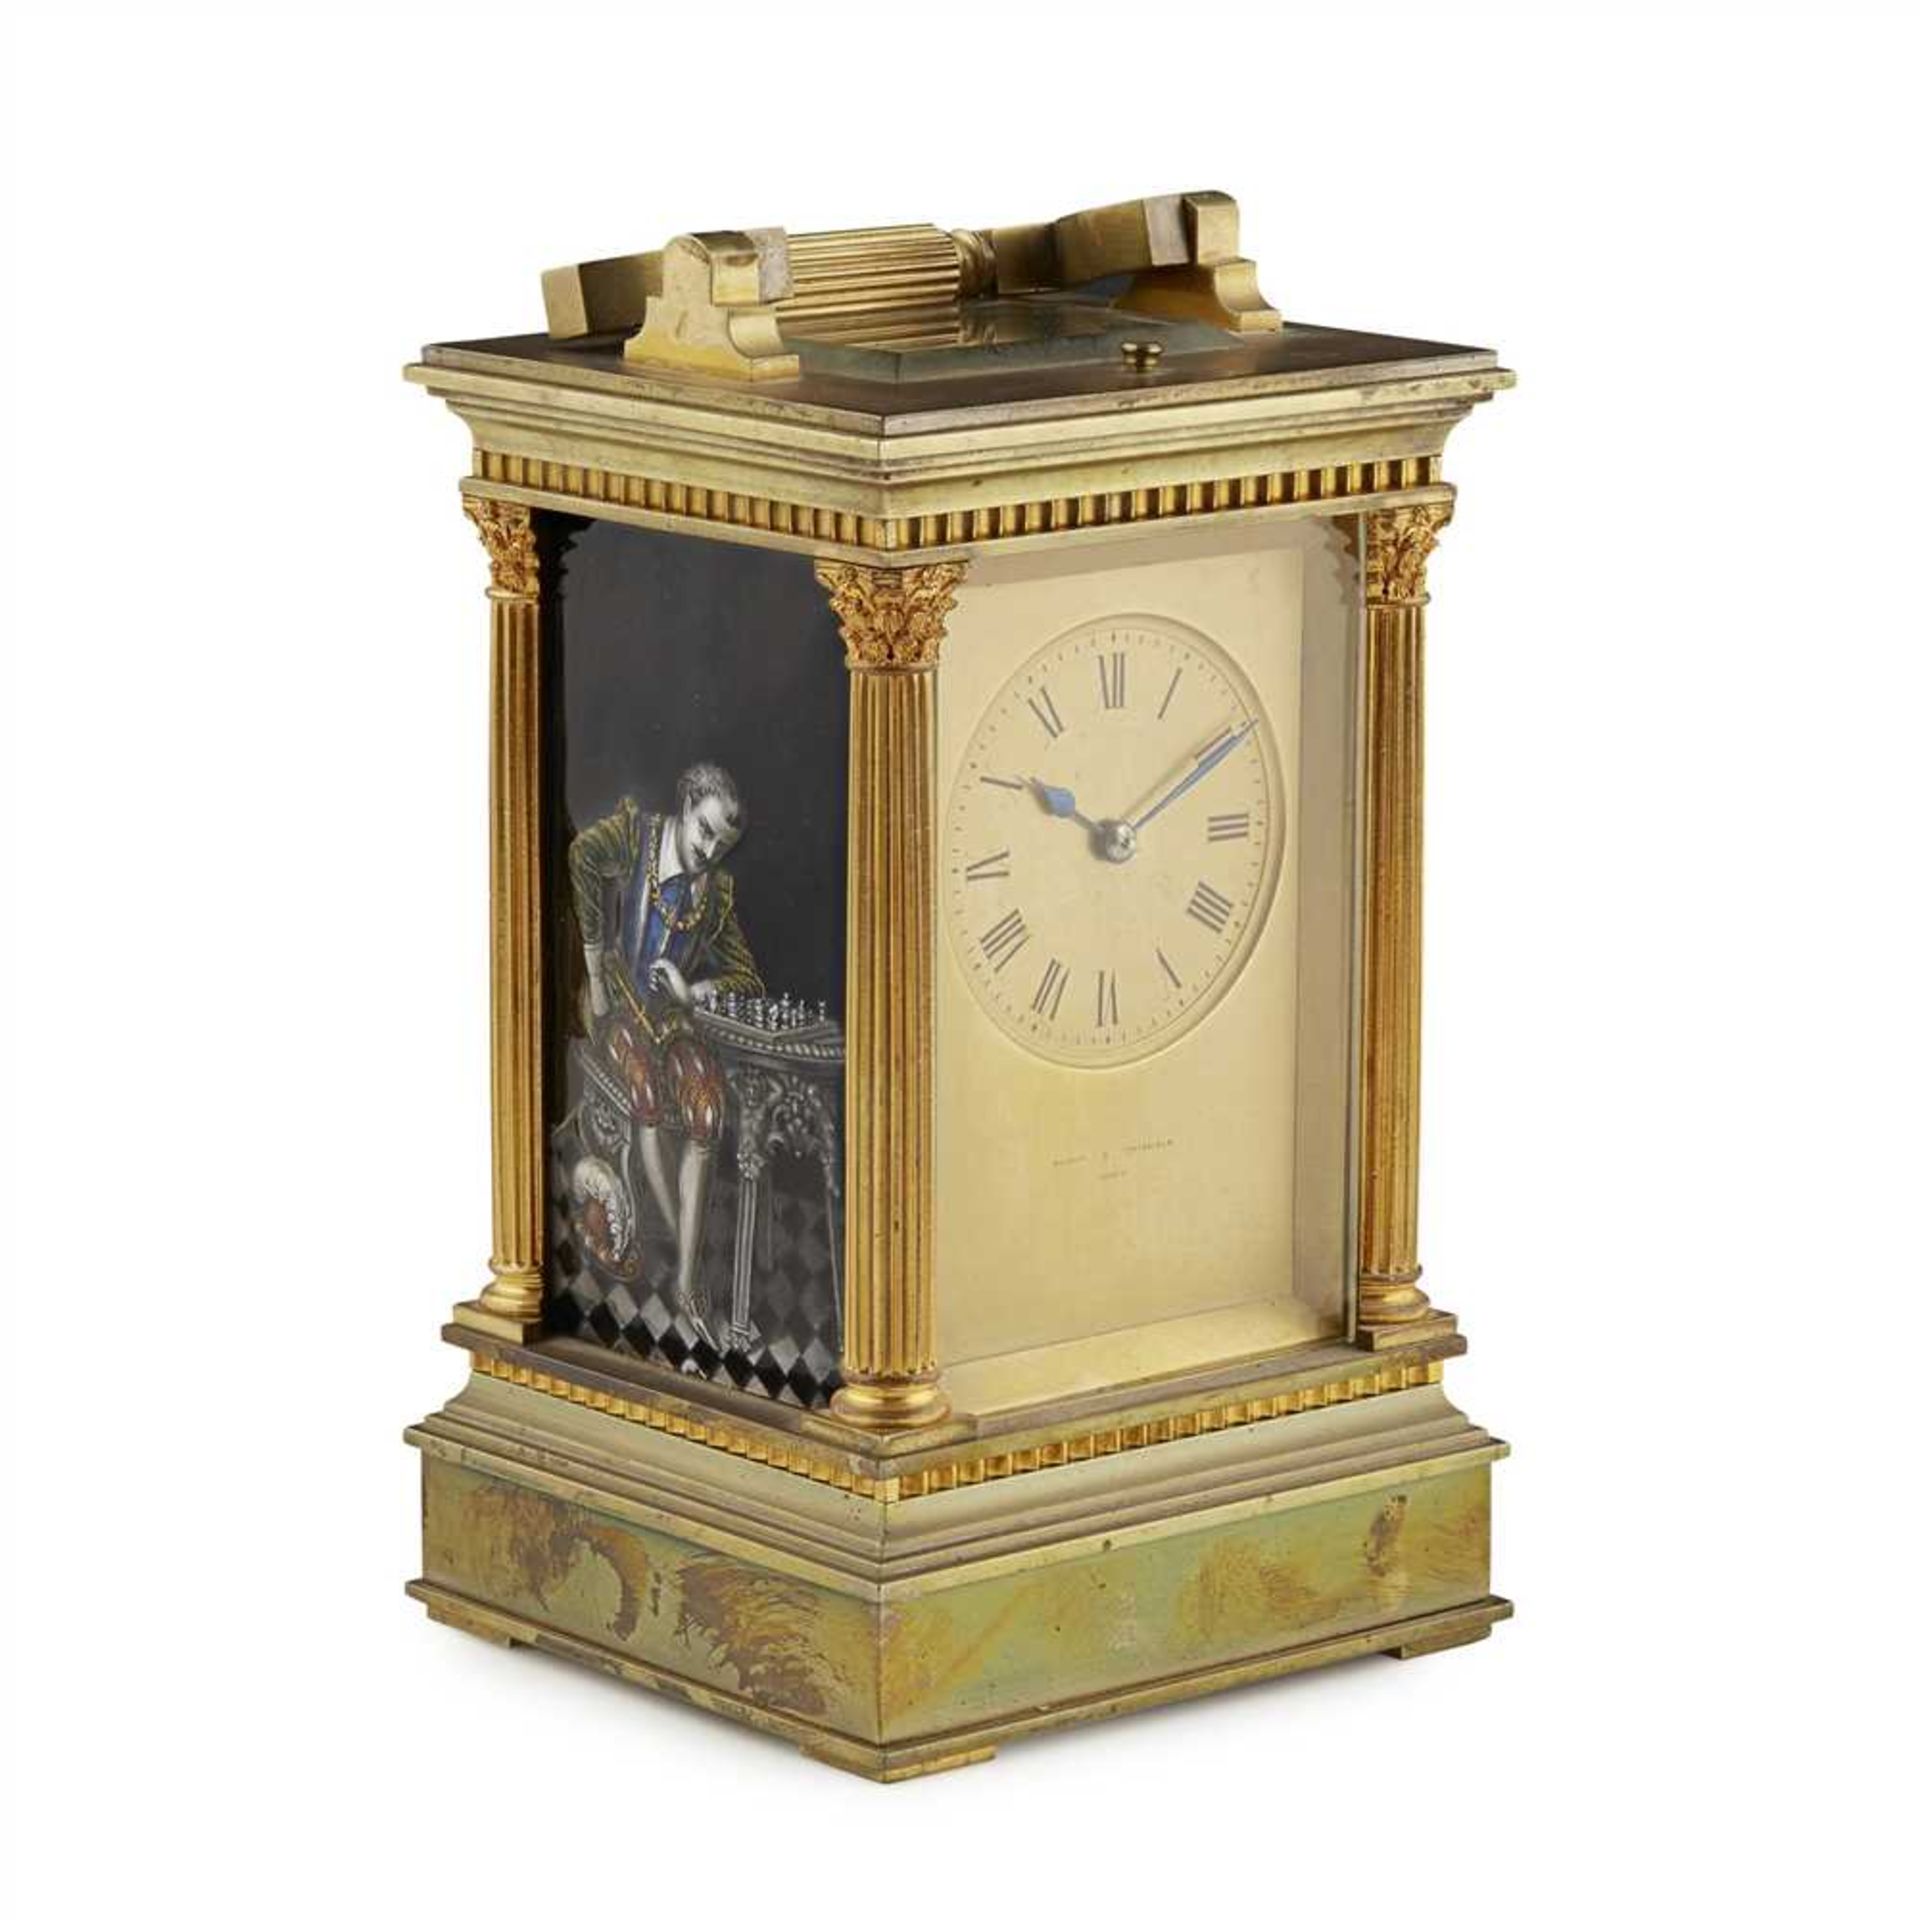 FRENCH LIMOGES ENAMEL AND GILT BRASS REPEATER CARRIAGE CLOCK LATE 19TH/ EARLY 20TH CENTURY